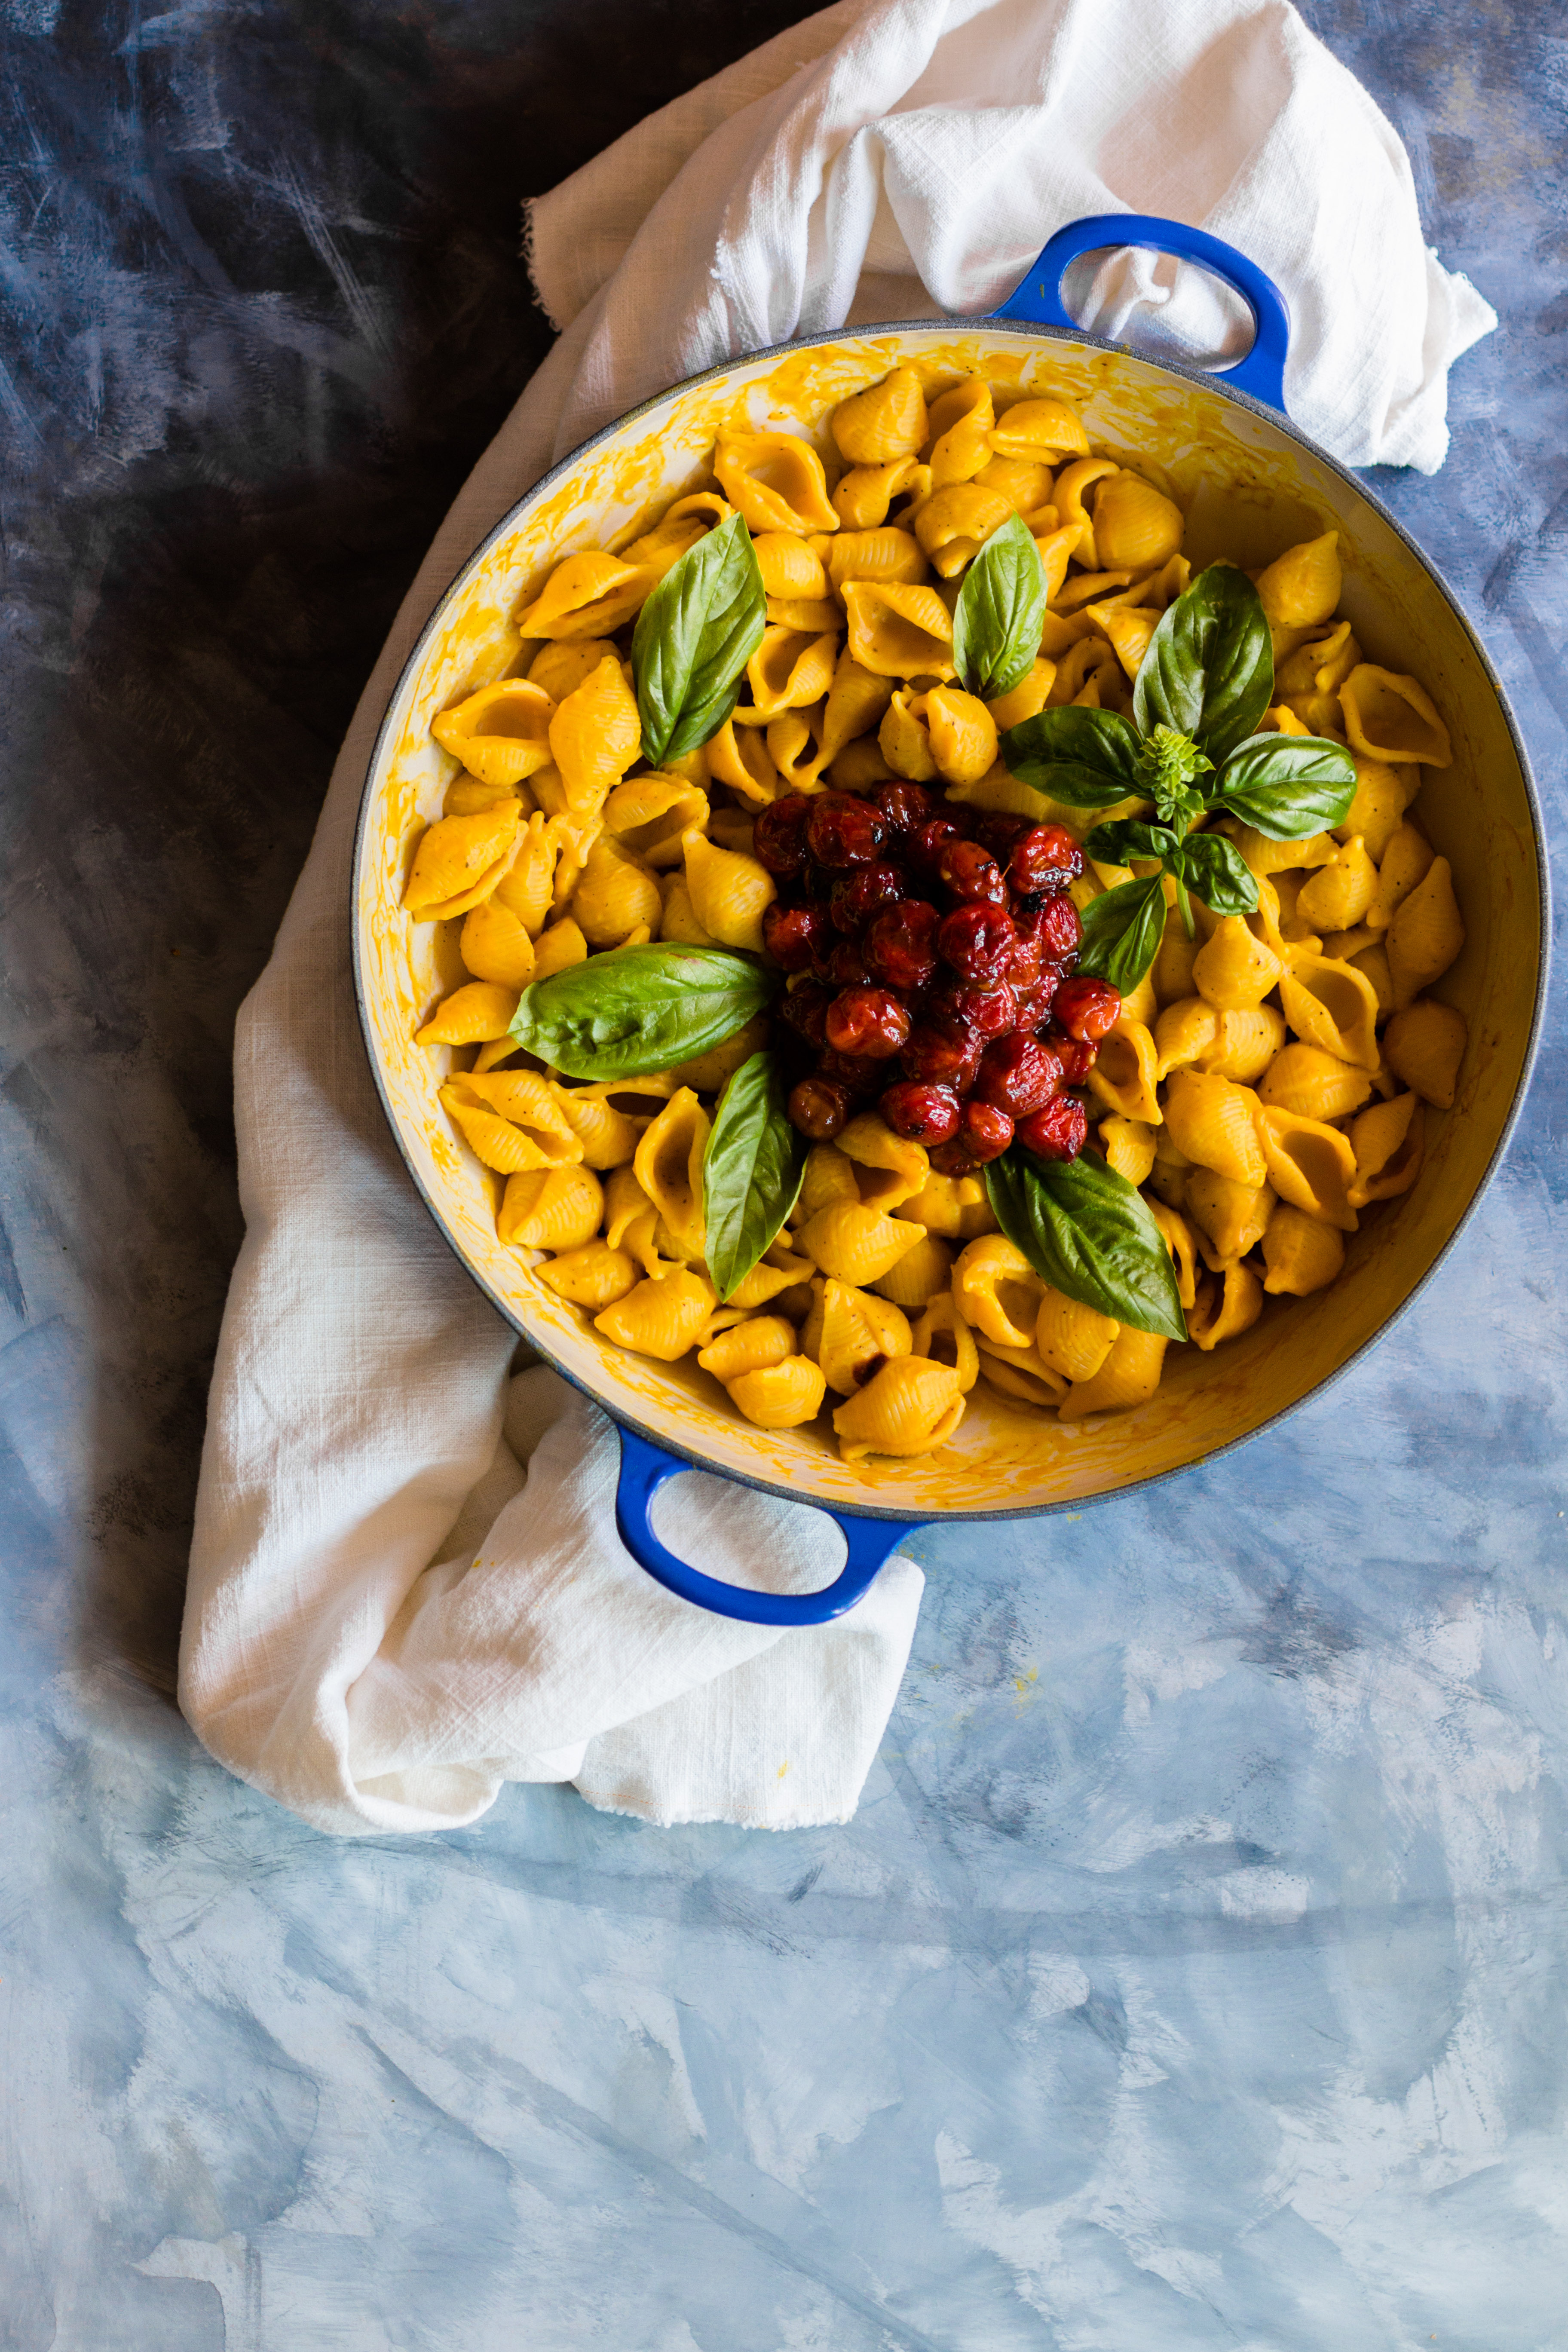 This Mac and Cheese with Vegan Pumpkin Cheese Sauce is so creamy and cheesy tasting, people will ask what kind of cheese you used. Serve with a side of slow roasted cherry tomatoes for an explosion of flavor. | #pumpkin #vegan | www.megiswell.com